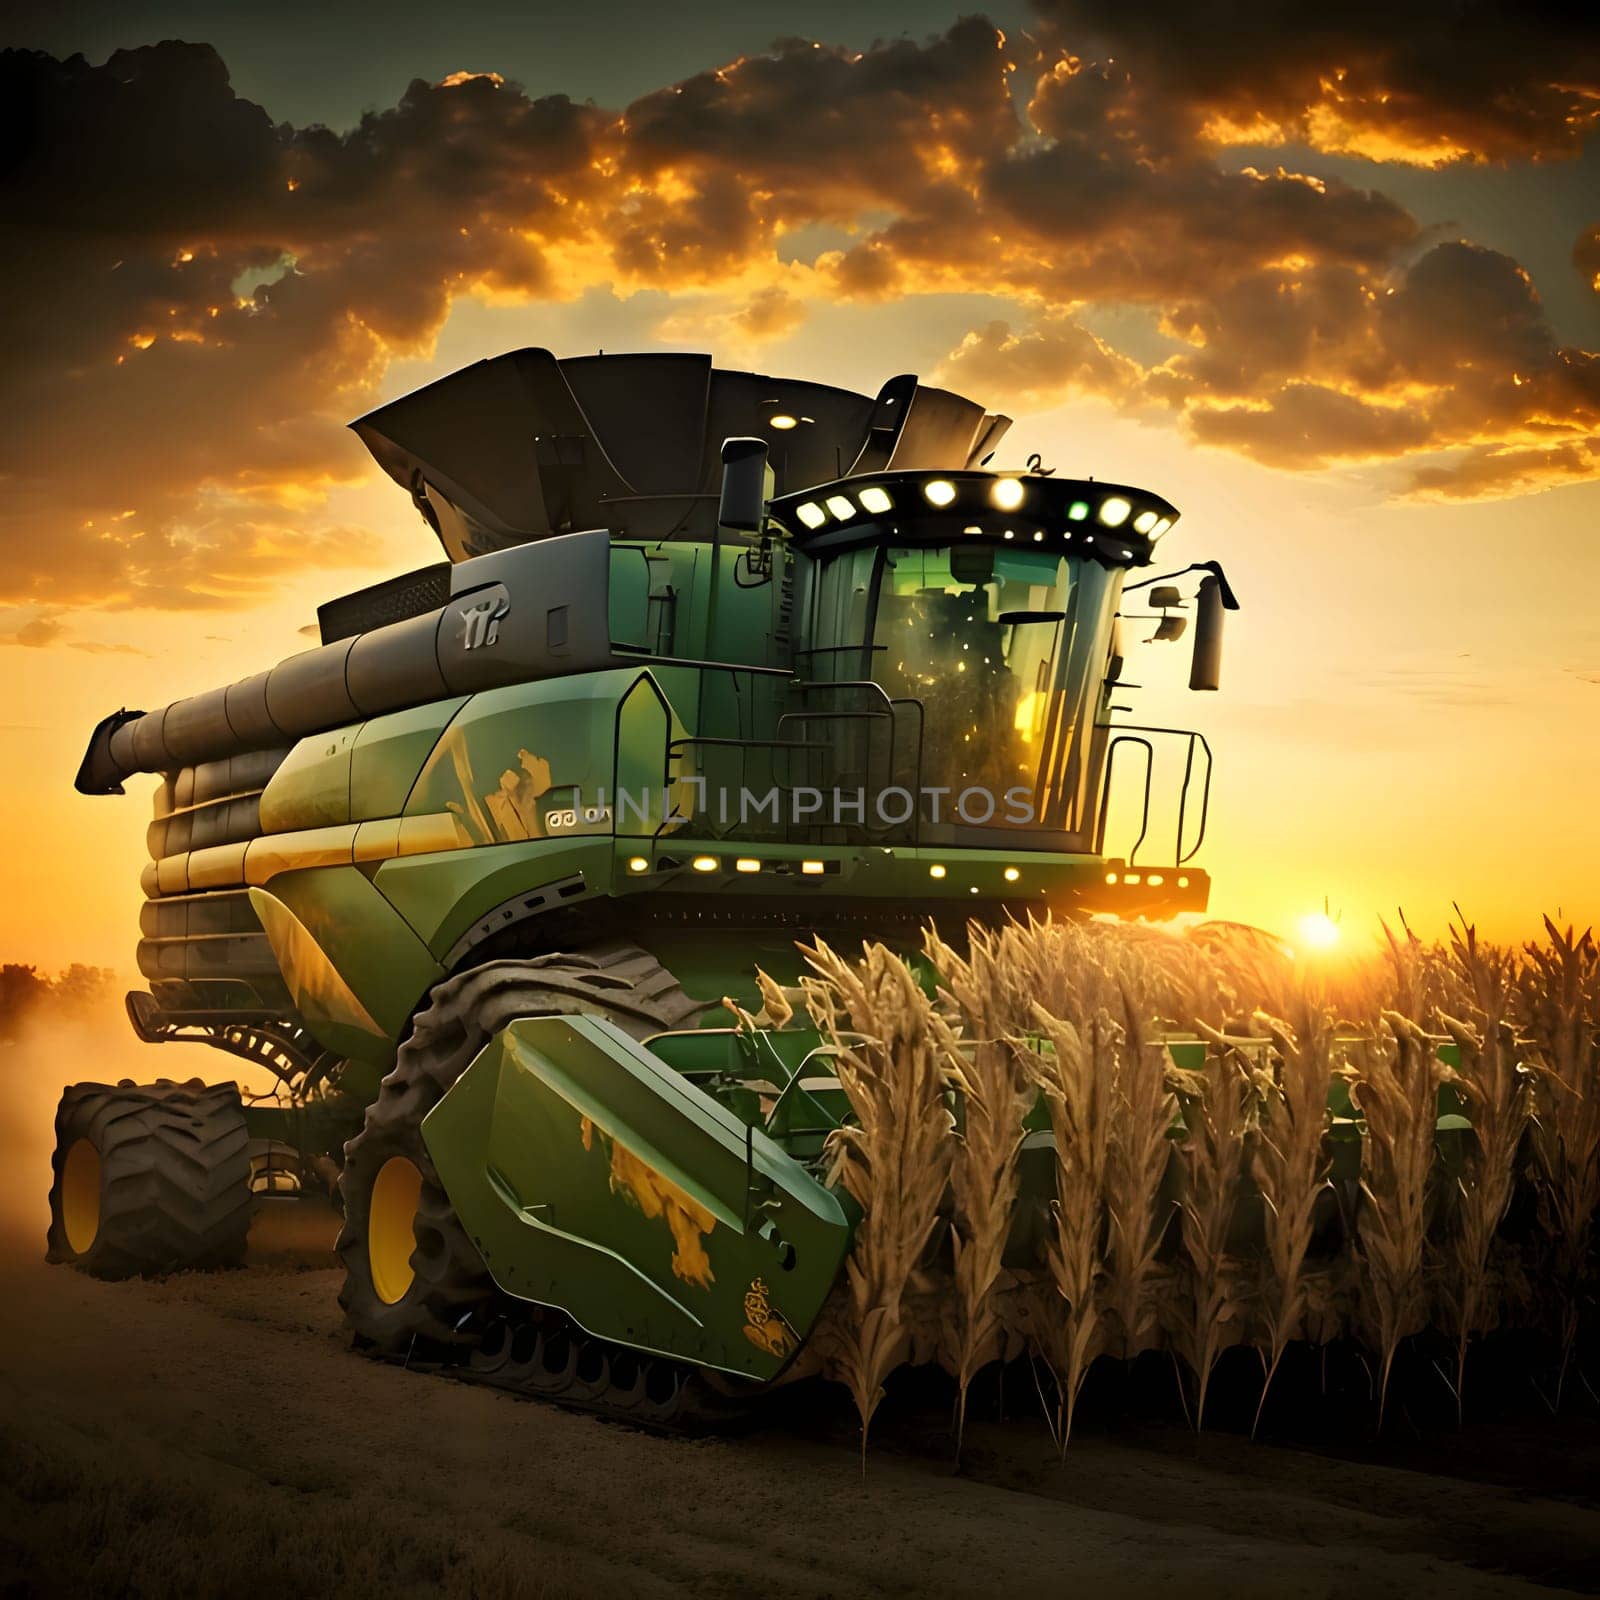 Combine during harvest in corn field sunset. Corn as a dish of thanksgiving for the harvest. An atmosphere of joy and celebration.